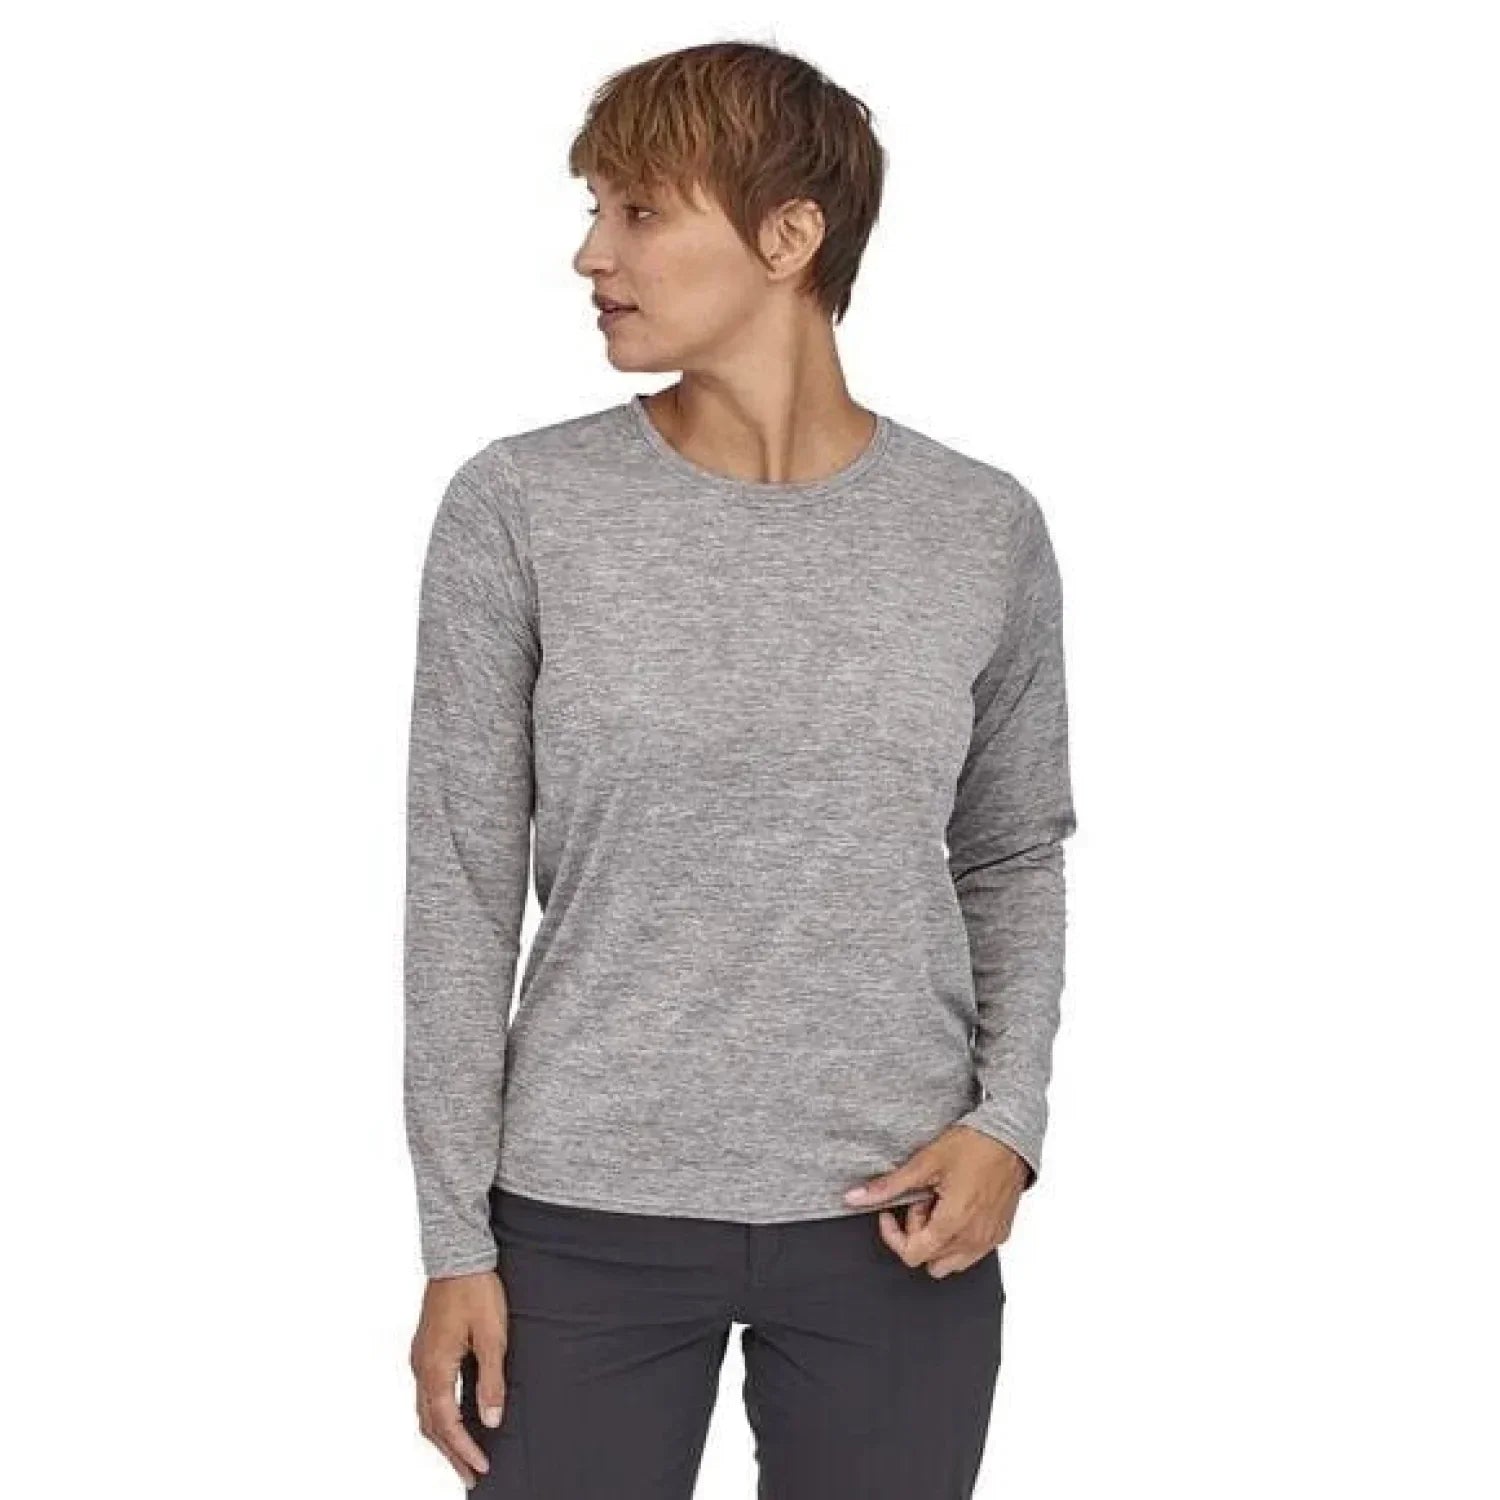 Patagonia 02. WOMENS APPAREL - WOMENS LS SHIRTS - WOMENS LS ACTIVE Women's Long Sleeve Capilene Cool Daily Shirt FEA FEATHER GREY